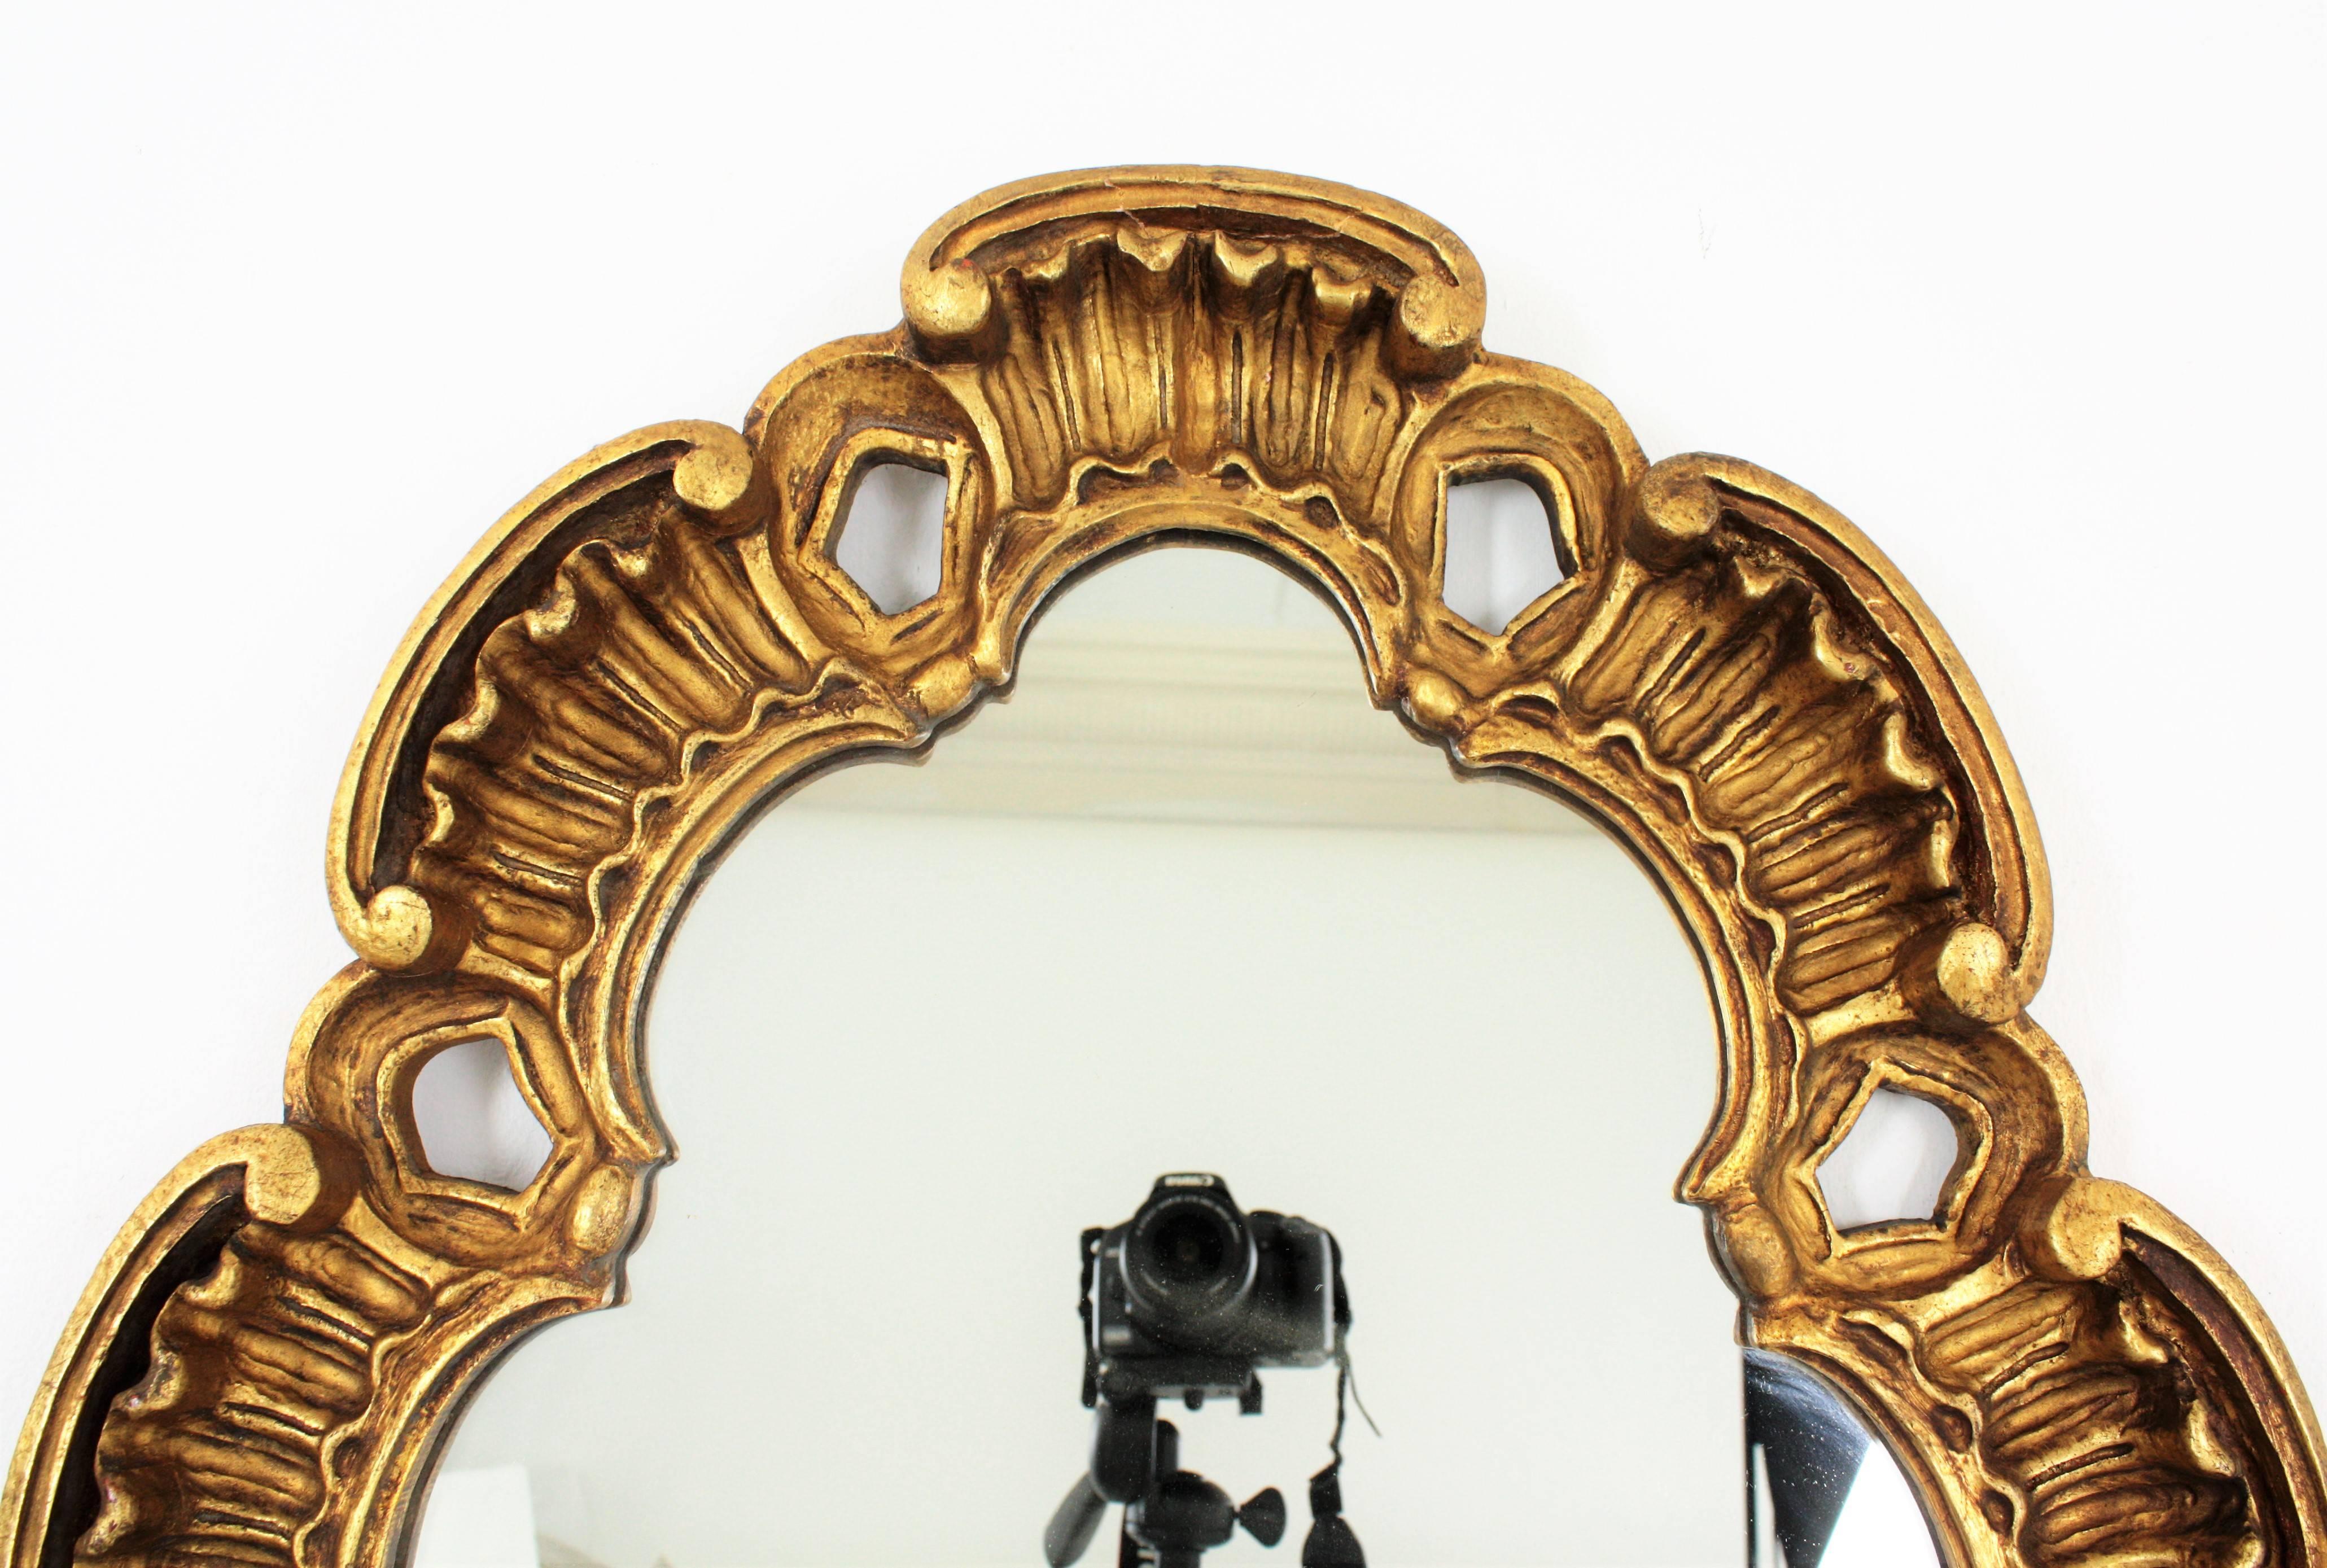 20th Century Spanish Gilt Carved Wood Oval Mirror by Francisco Hurtado, 1950s For Sale